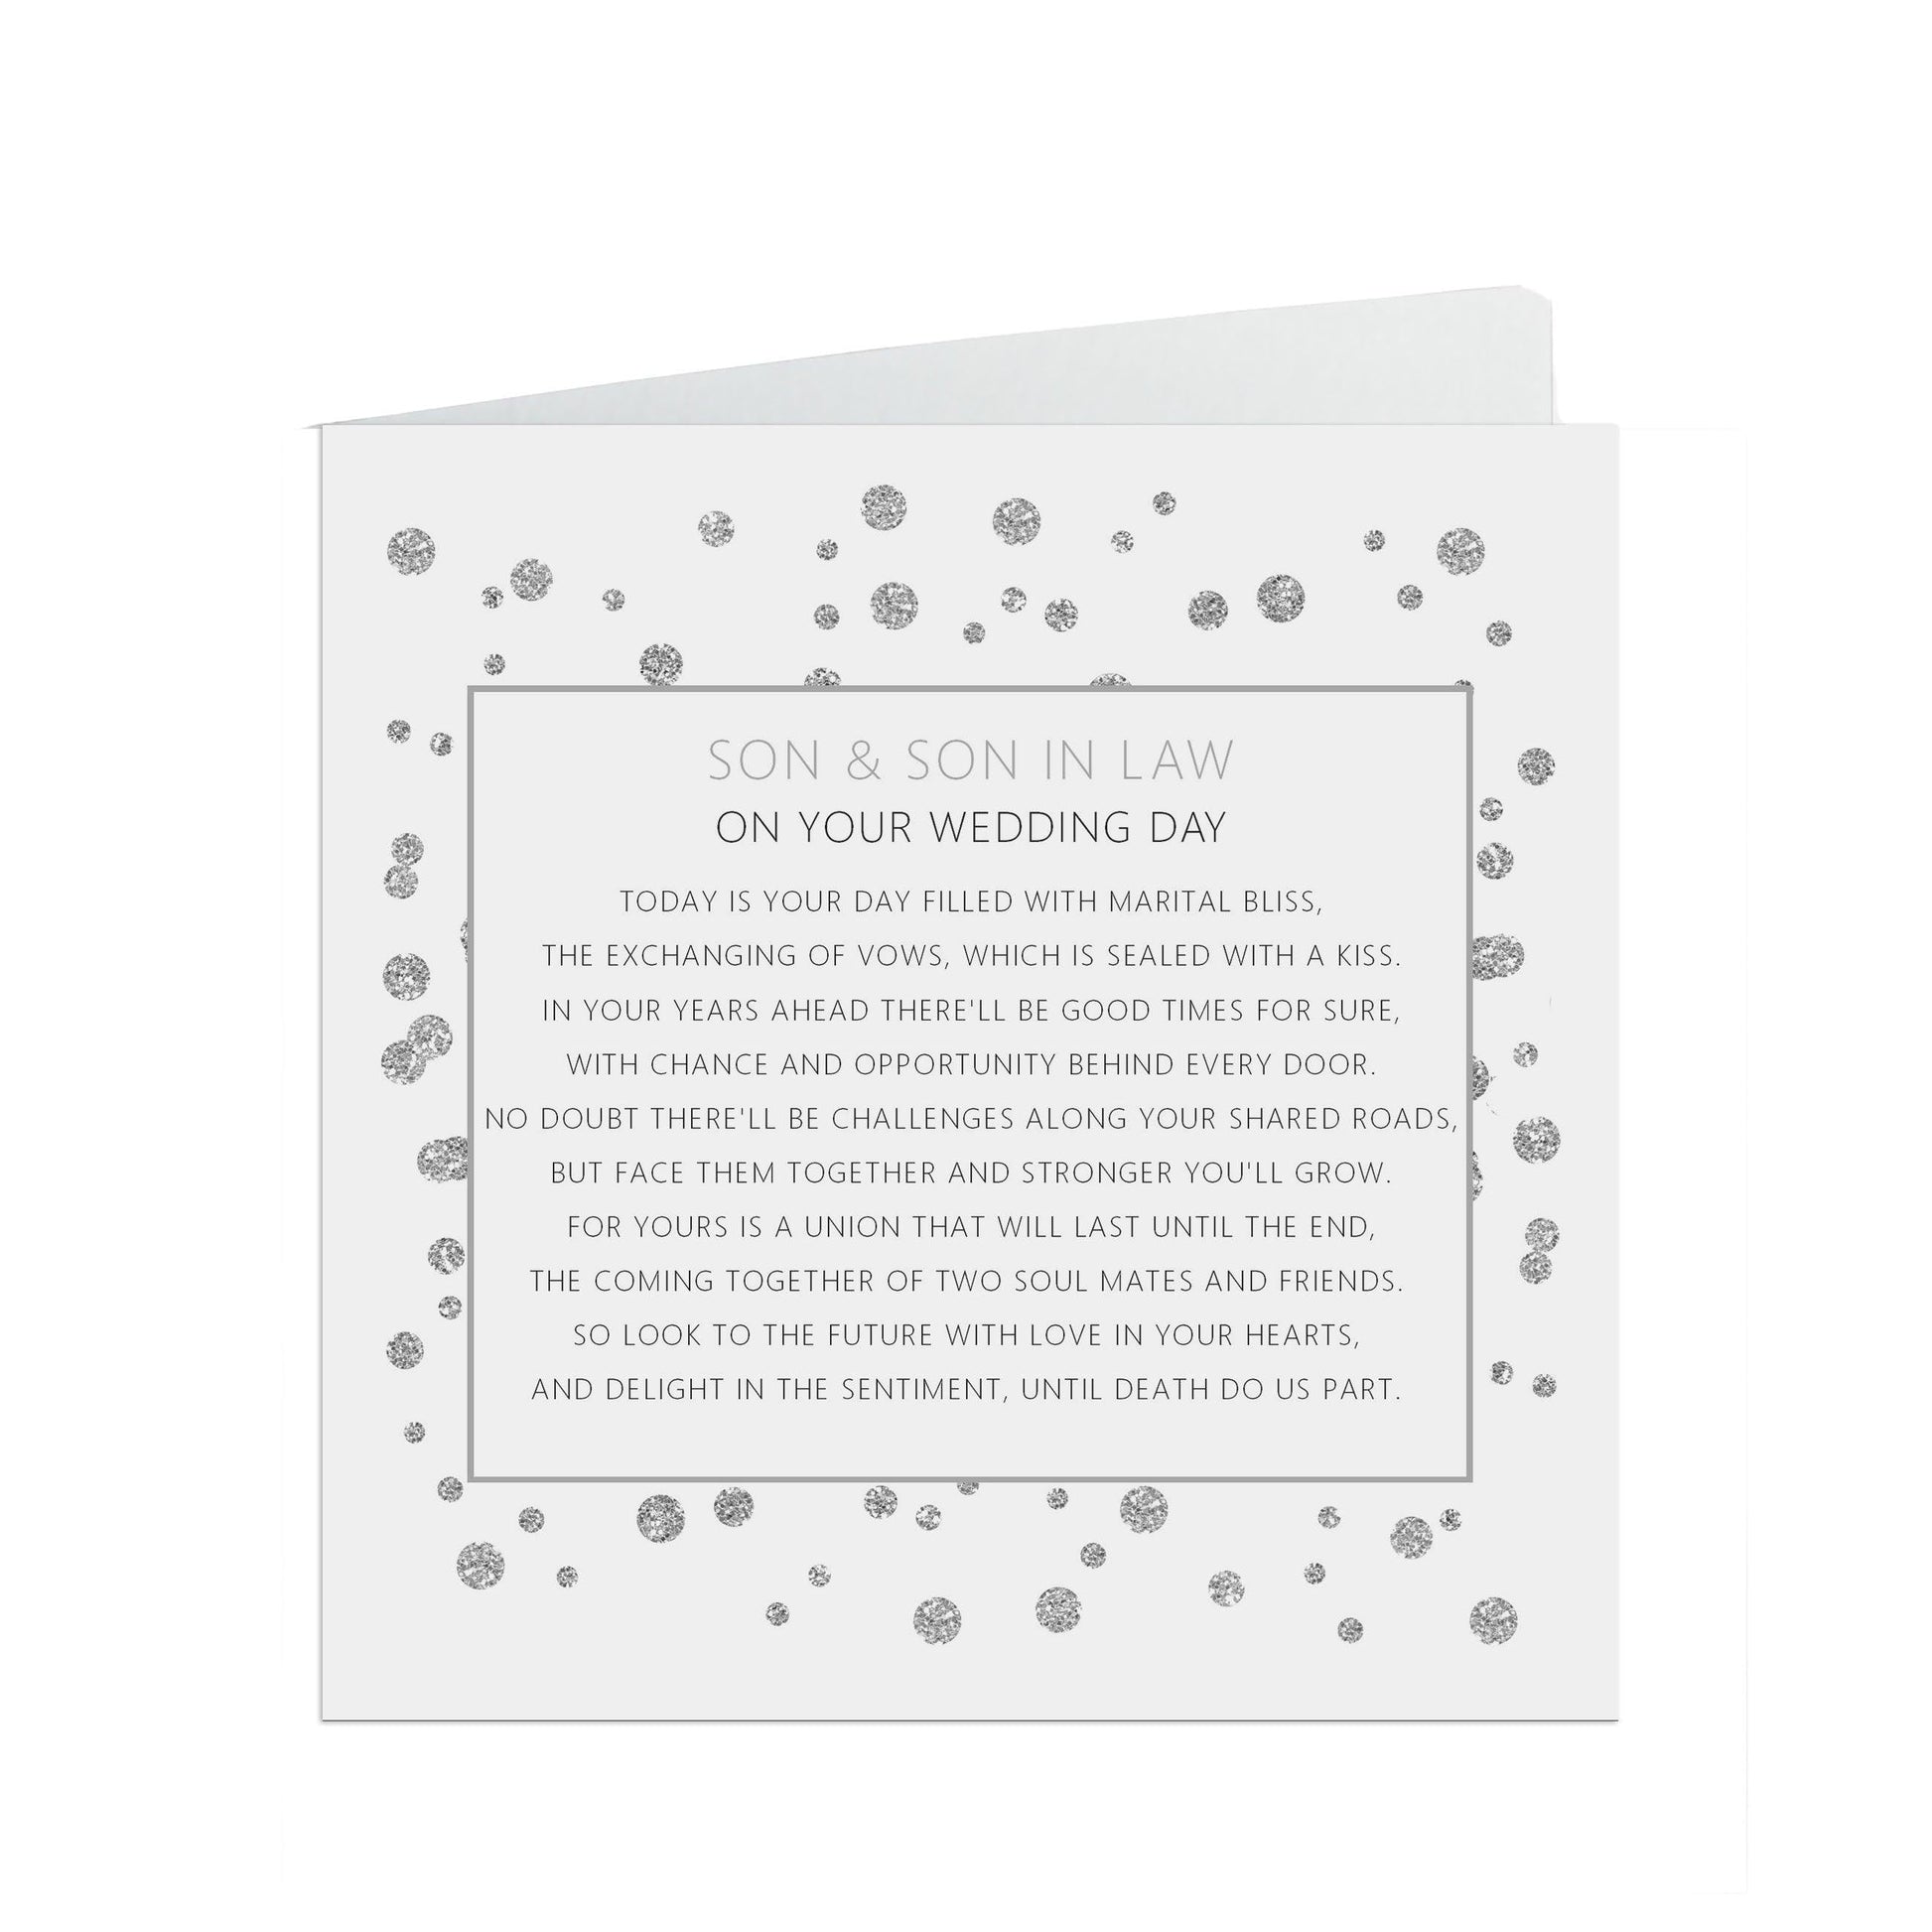  Son & Son In Law On Your Wedding Day Card, Silver Effect 6x6 Inches With A White Envelope by PMPRINTED 